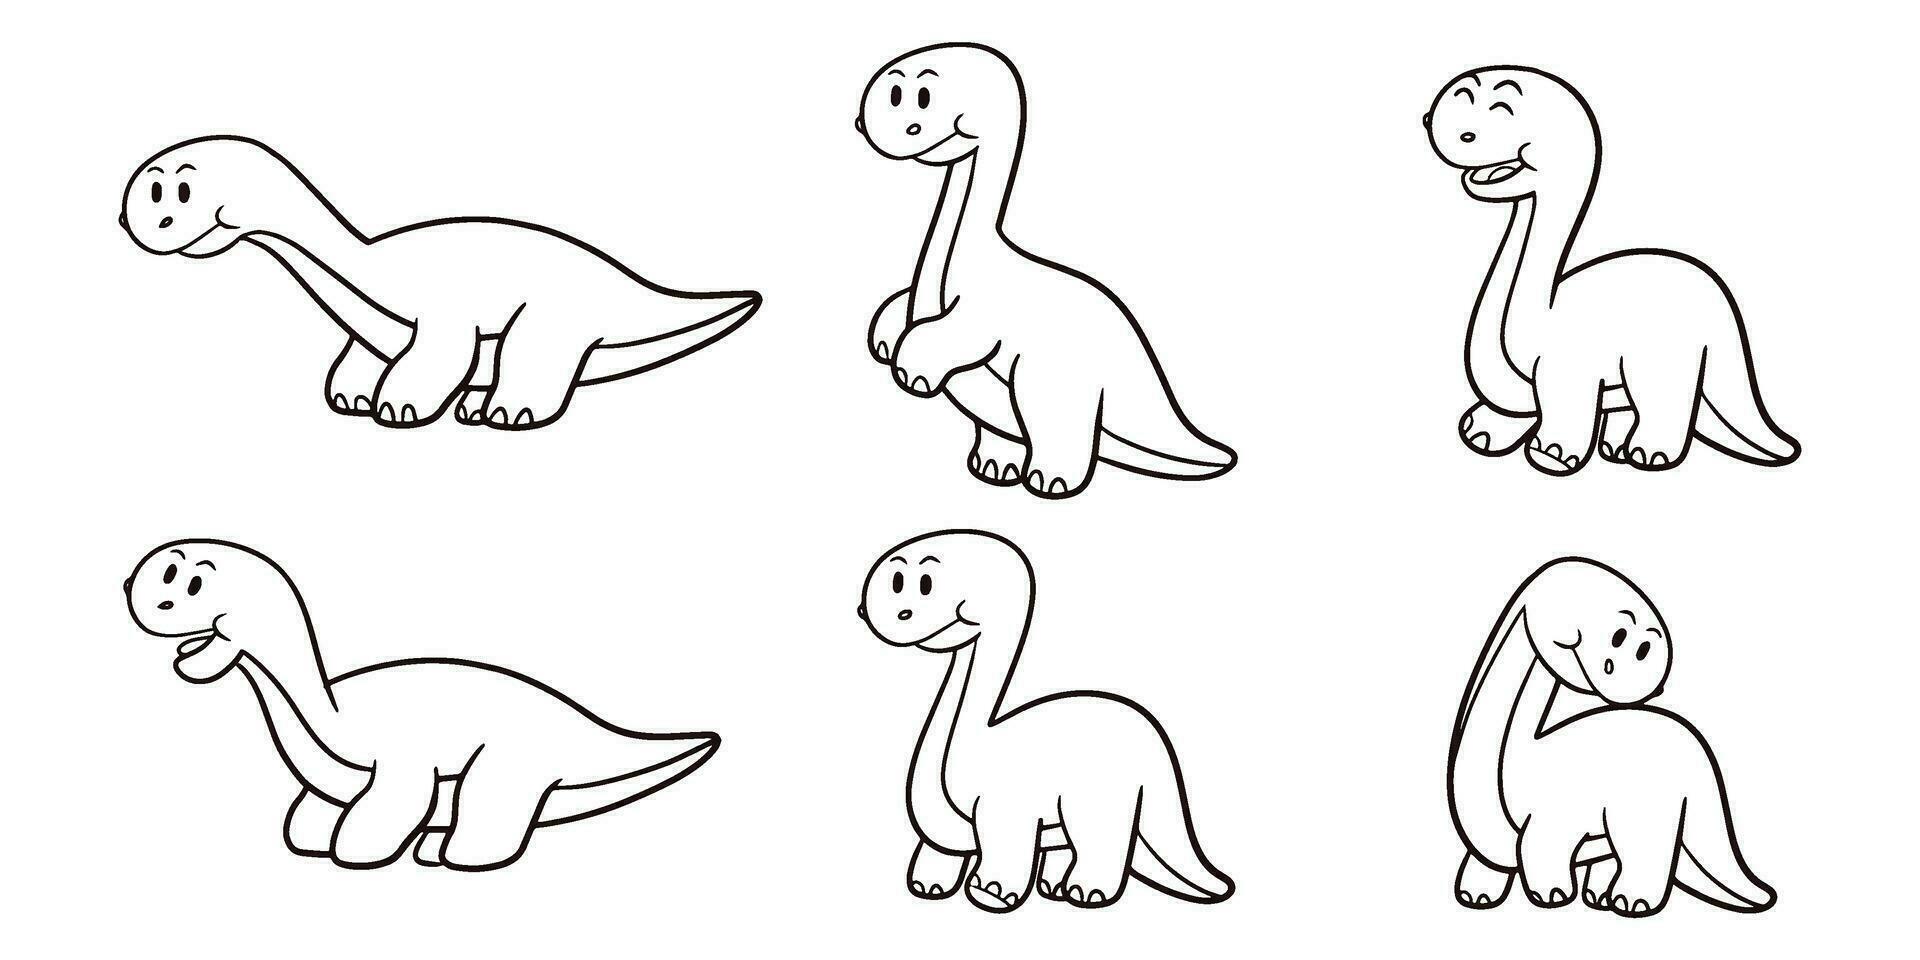 Collection of dinosaurs in various poses. Coloring dino saurus. Dinosaur line vector